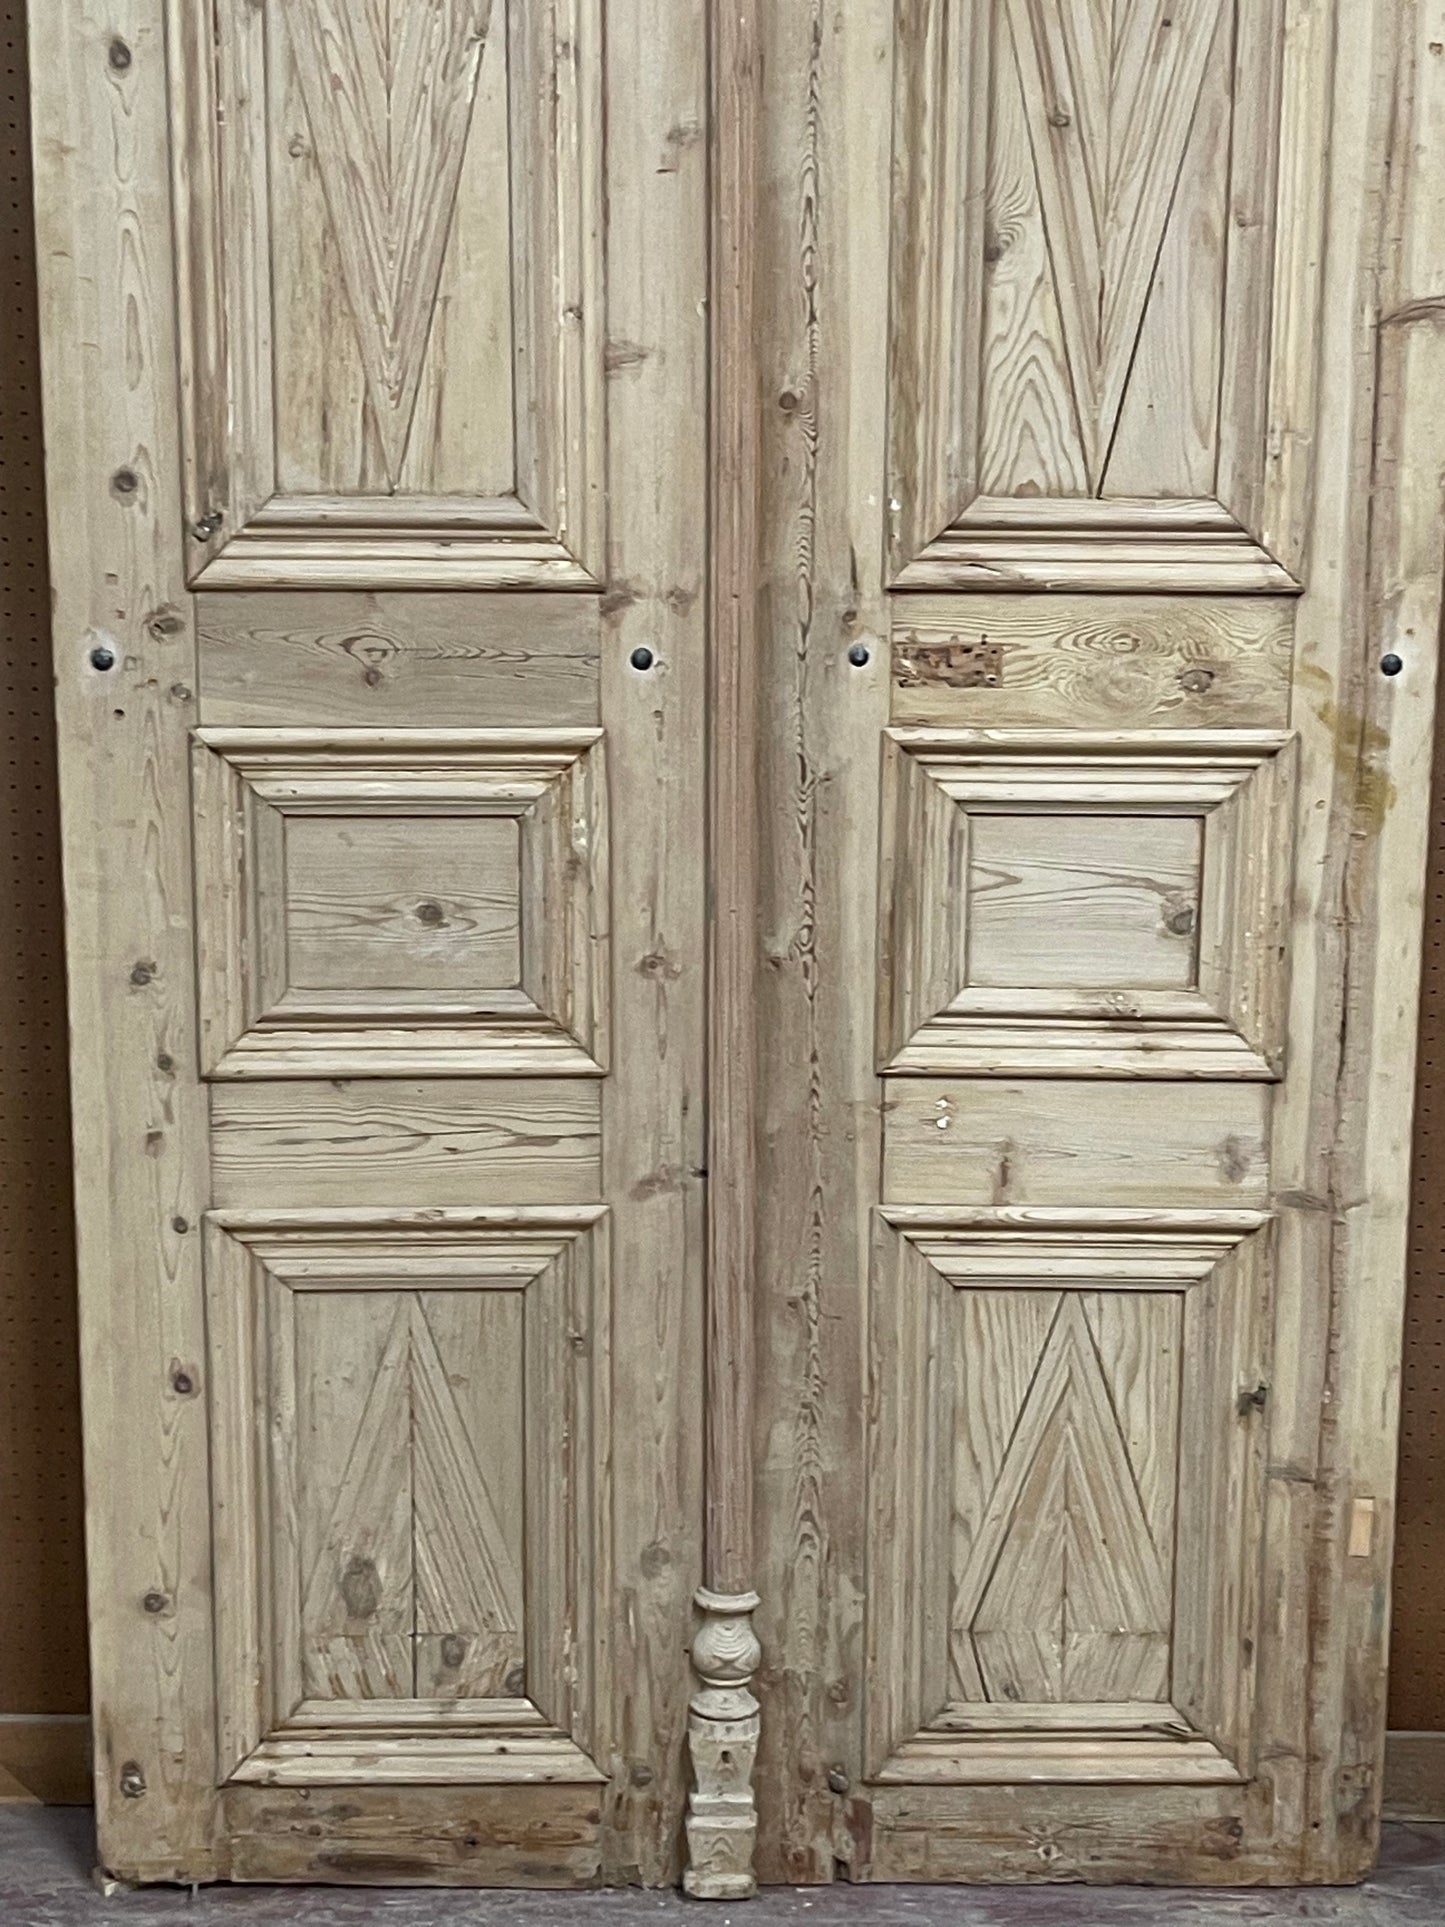 Antique  French Panel Door with Carving  (131x53.5)  E998